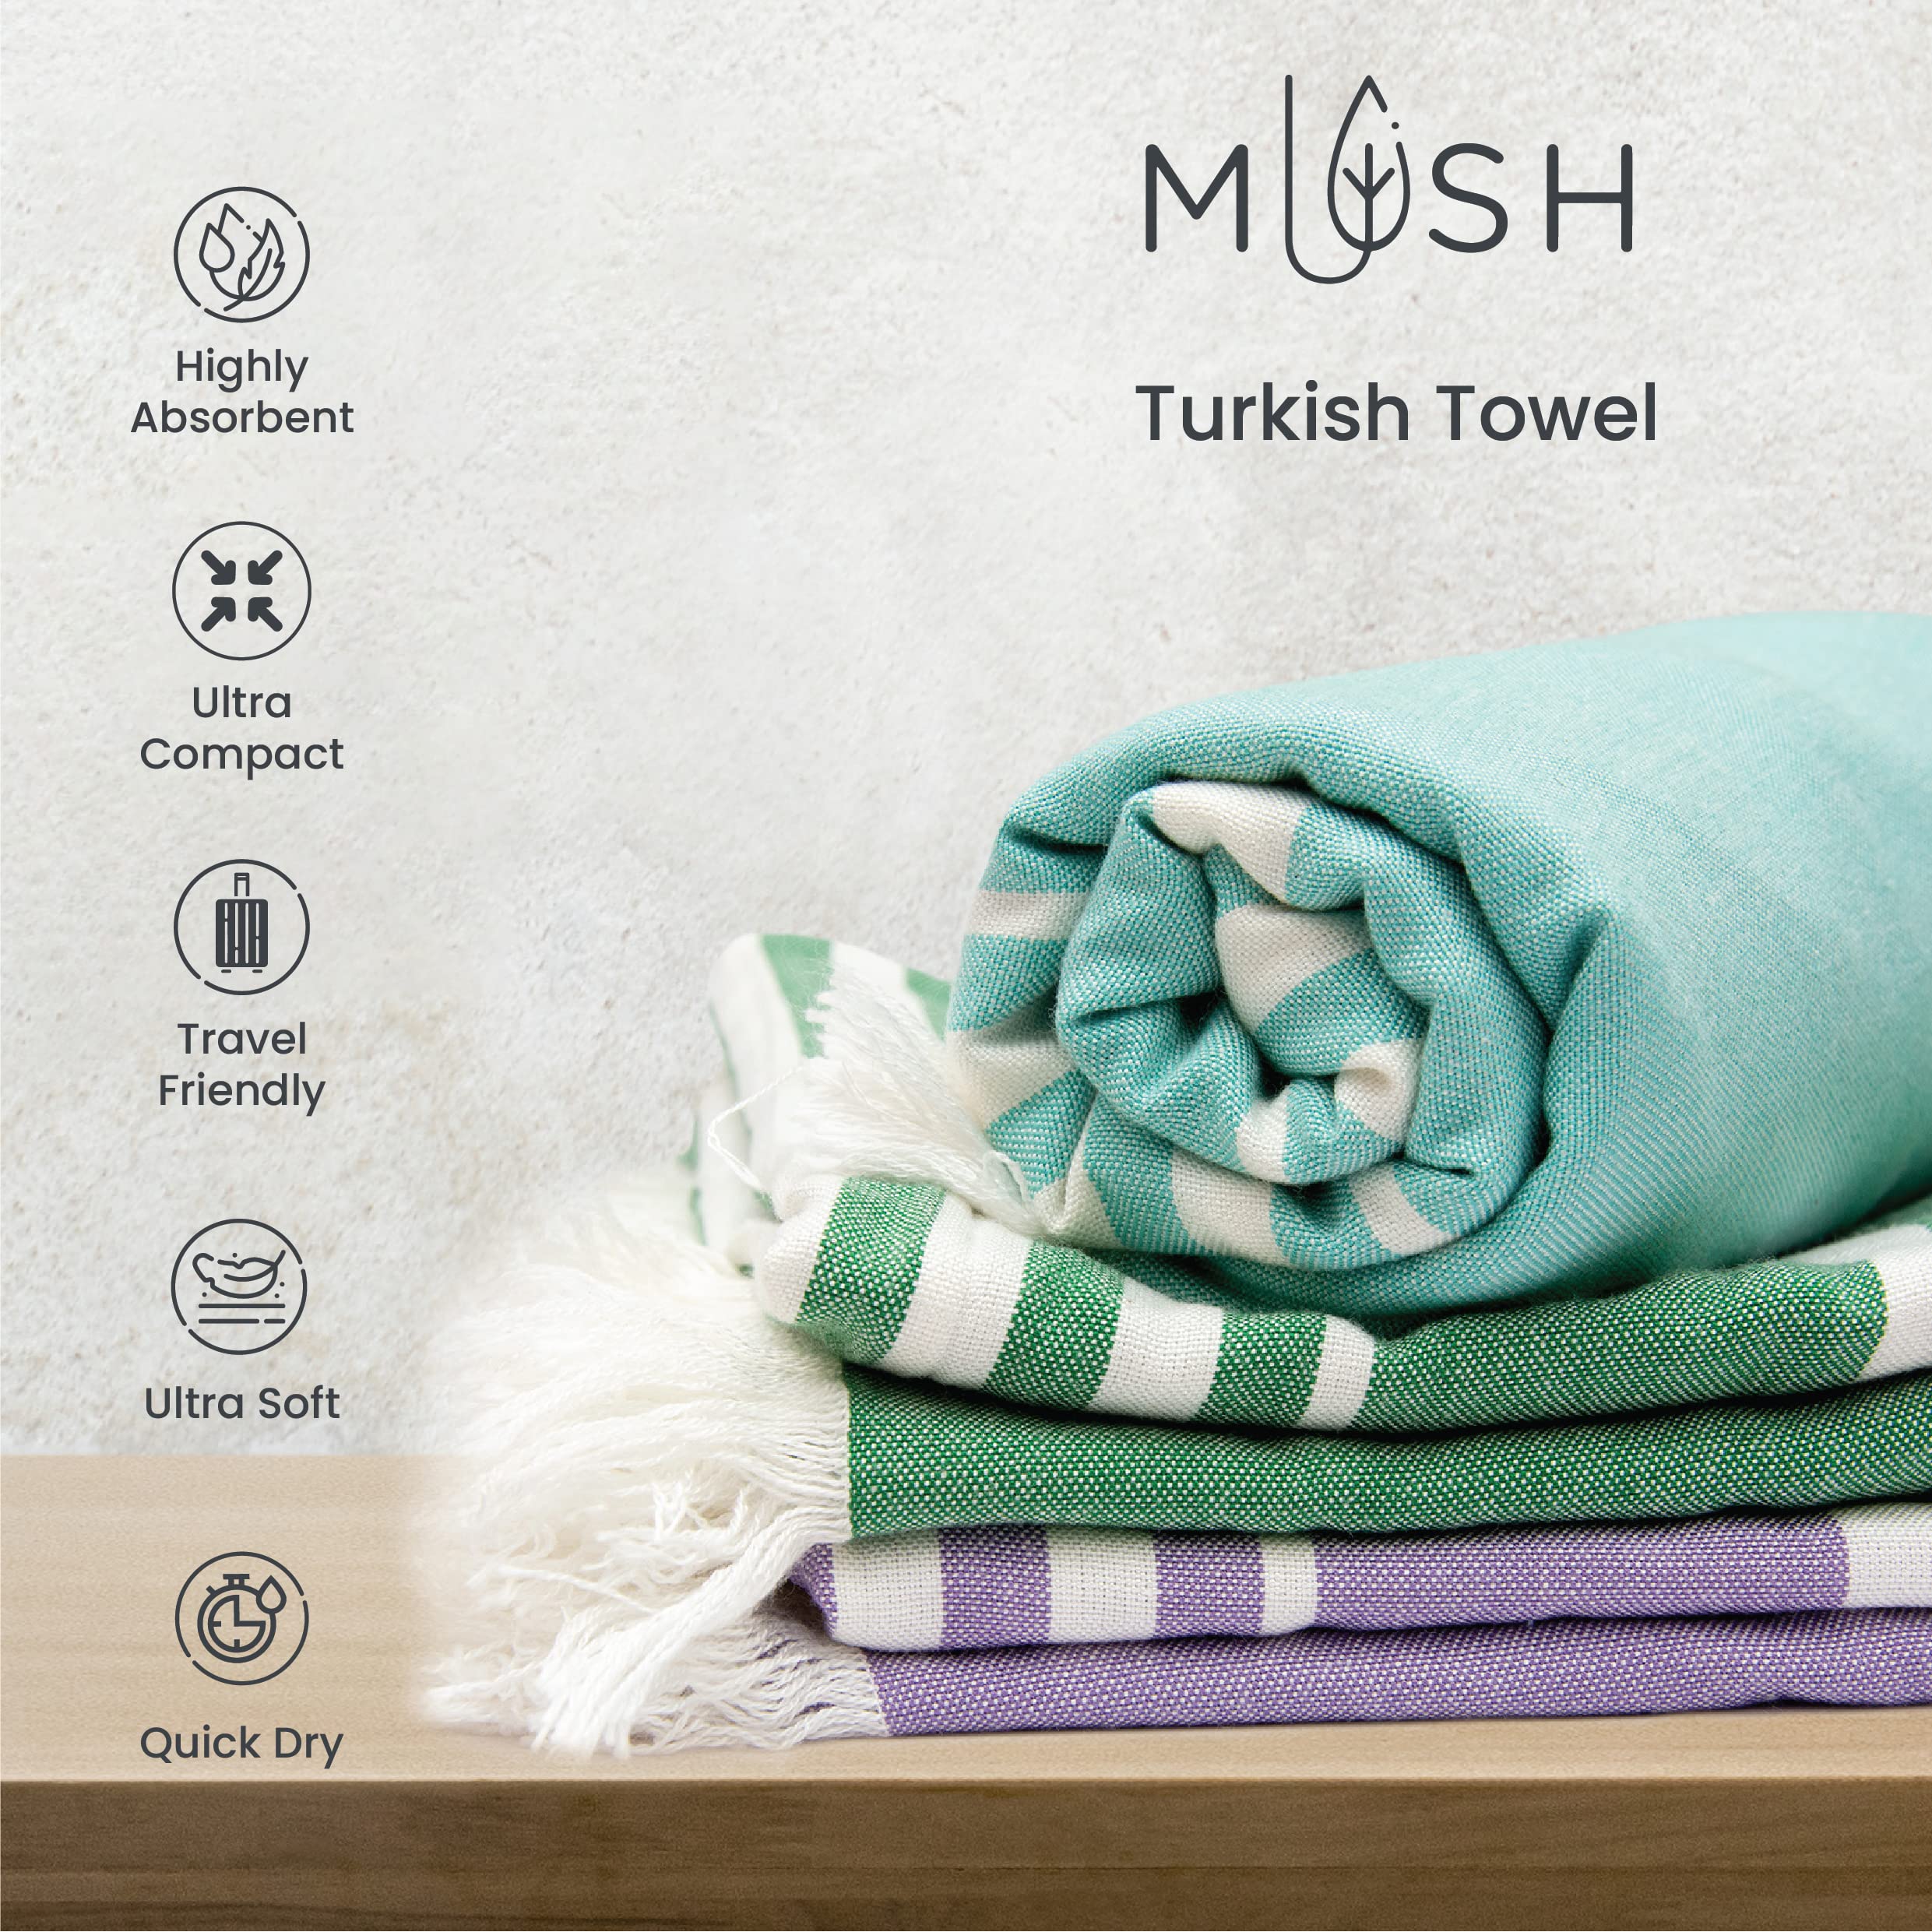 Mush 100% Bamboo Large Bath Towel | Ultra Soft, Absorbent, Light Weight, & Quick Dry Towel for Bath, Travel, Gym, Beach, Pool, and Yoga | 29 x 59 Inches / 75 X 150 cms (Set of 1, Green)